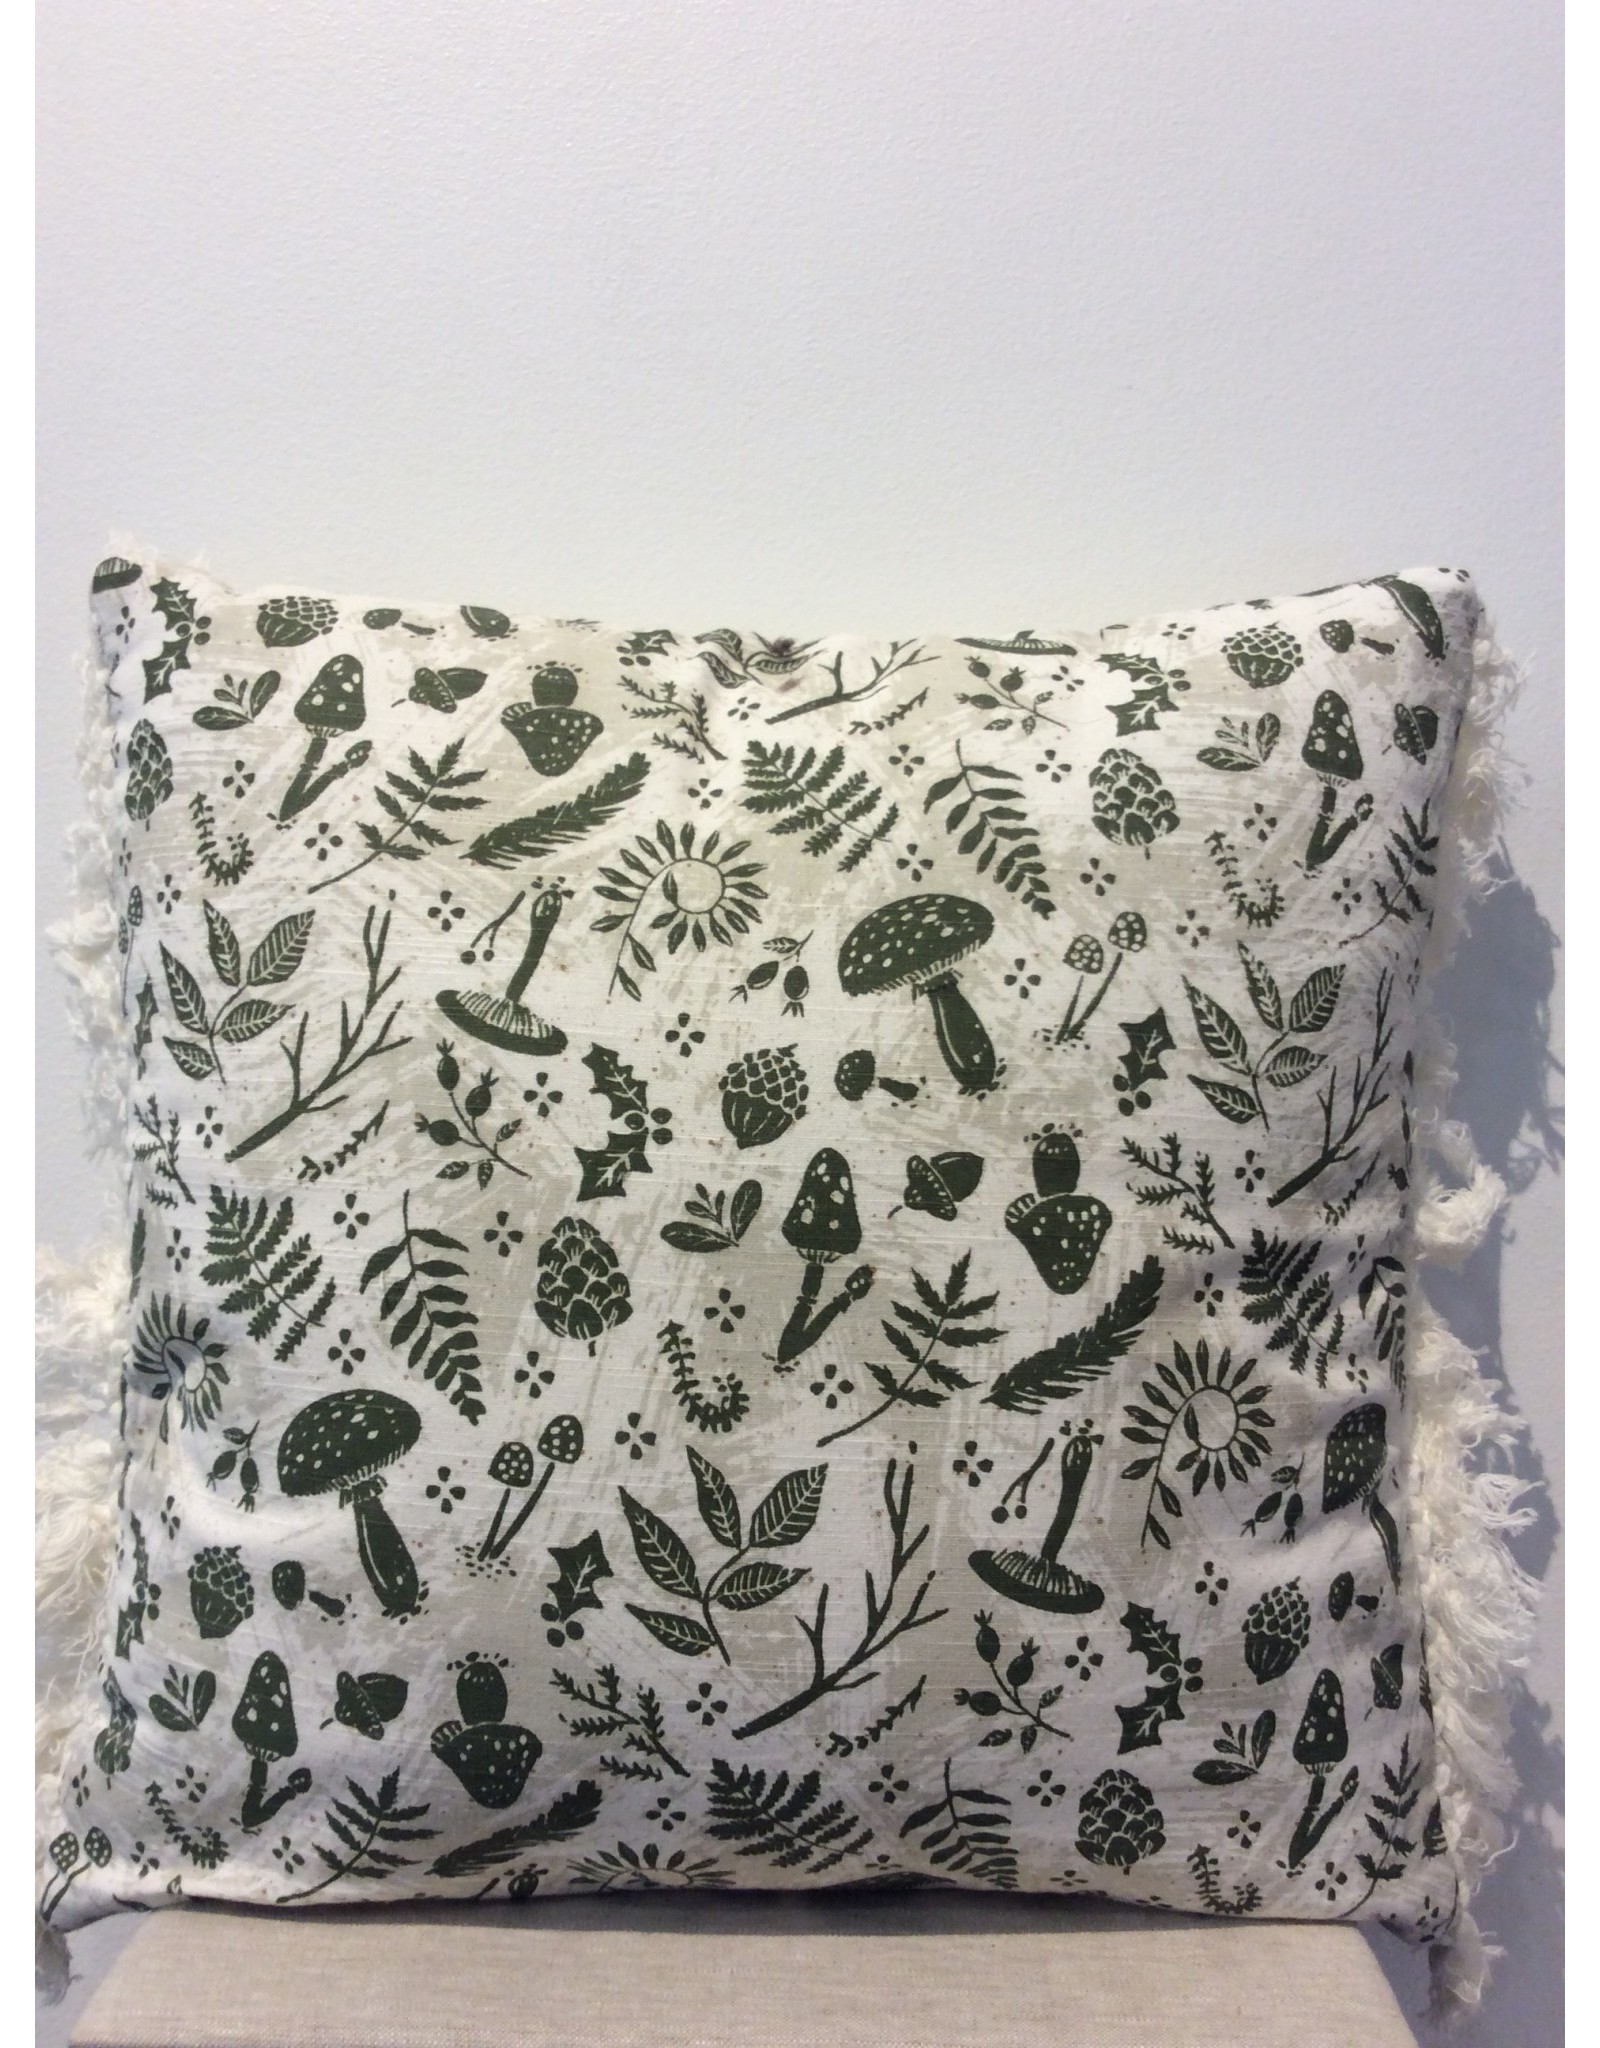 18" Square Cotton Slub Printed Pillow with Pattern and Fringe, Multi Color